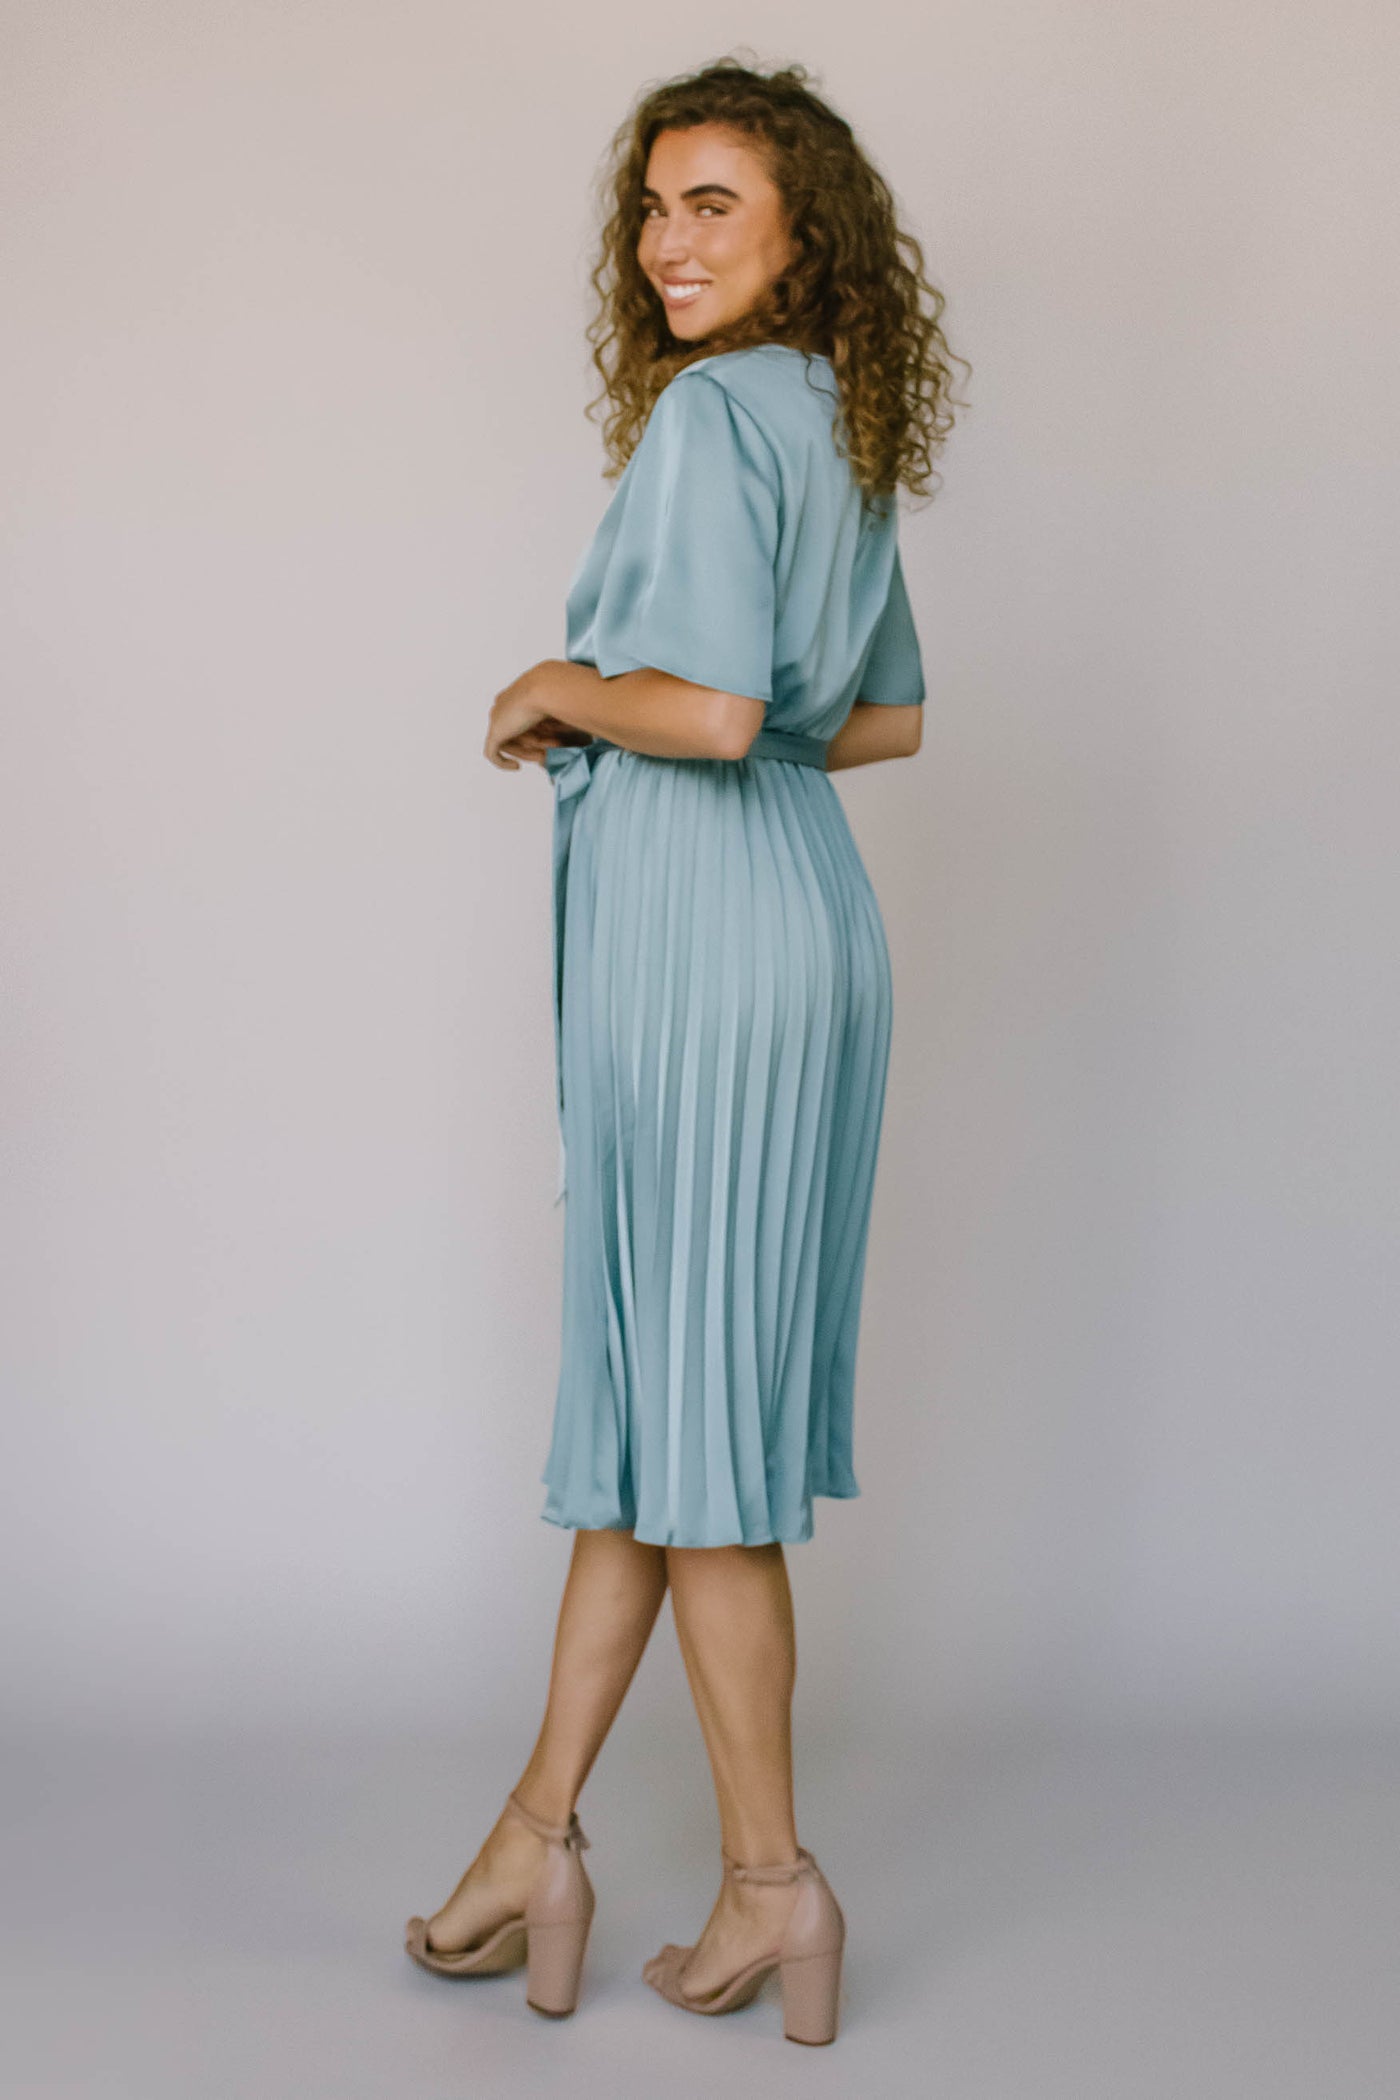 The back of a modest dress in a blue silky fabric, flutter sleeves, a pleated skirts, and a defined waist with a tie.